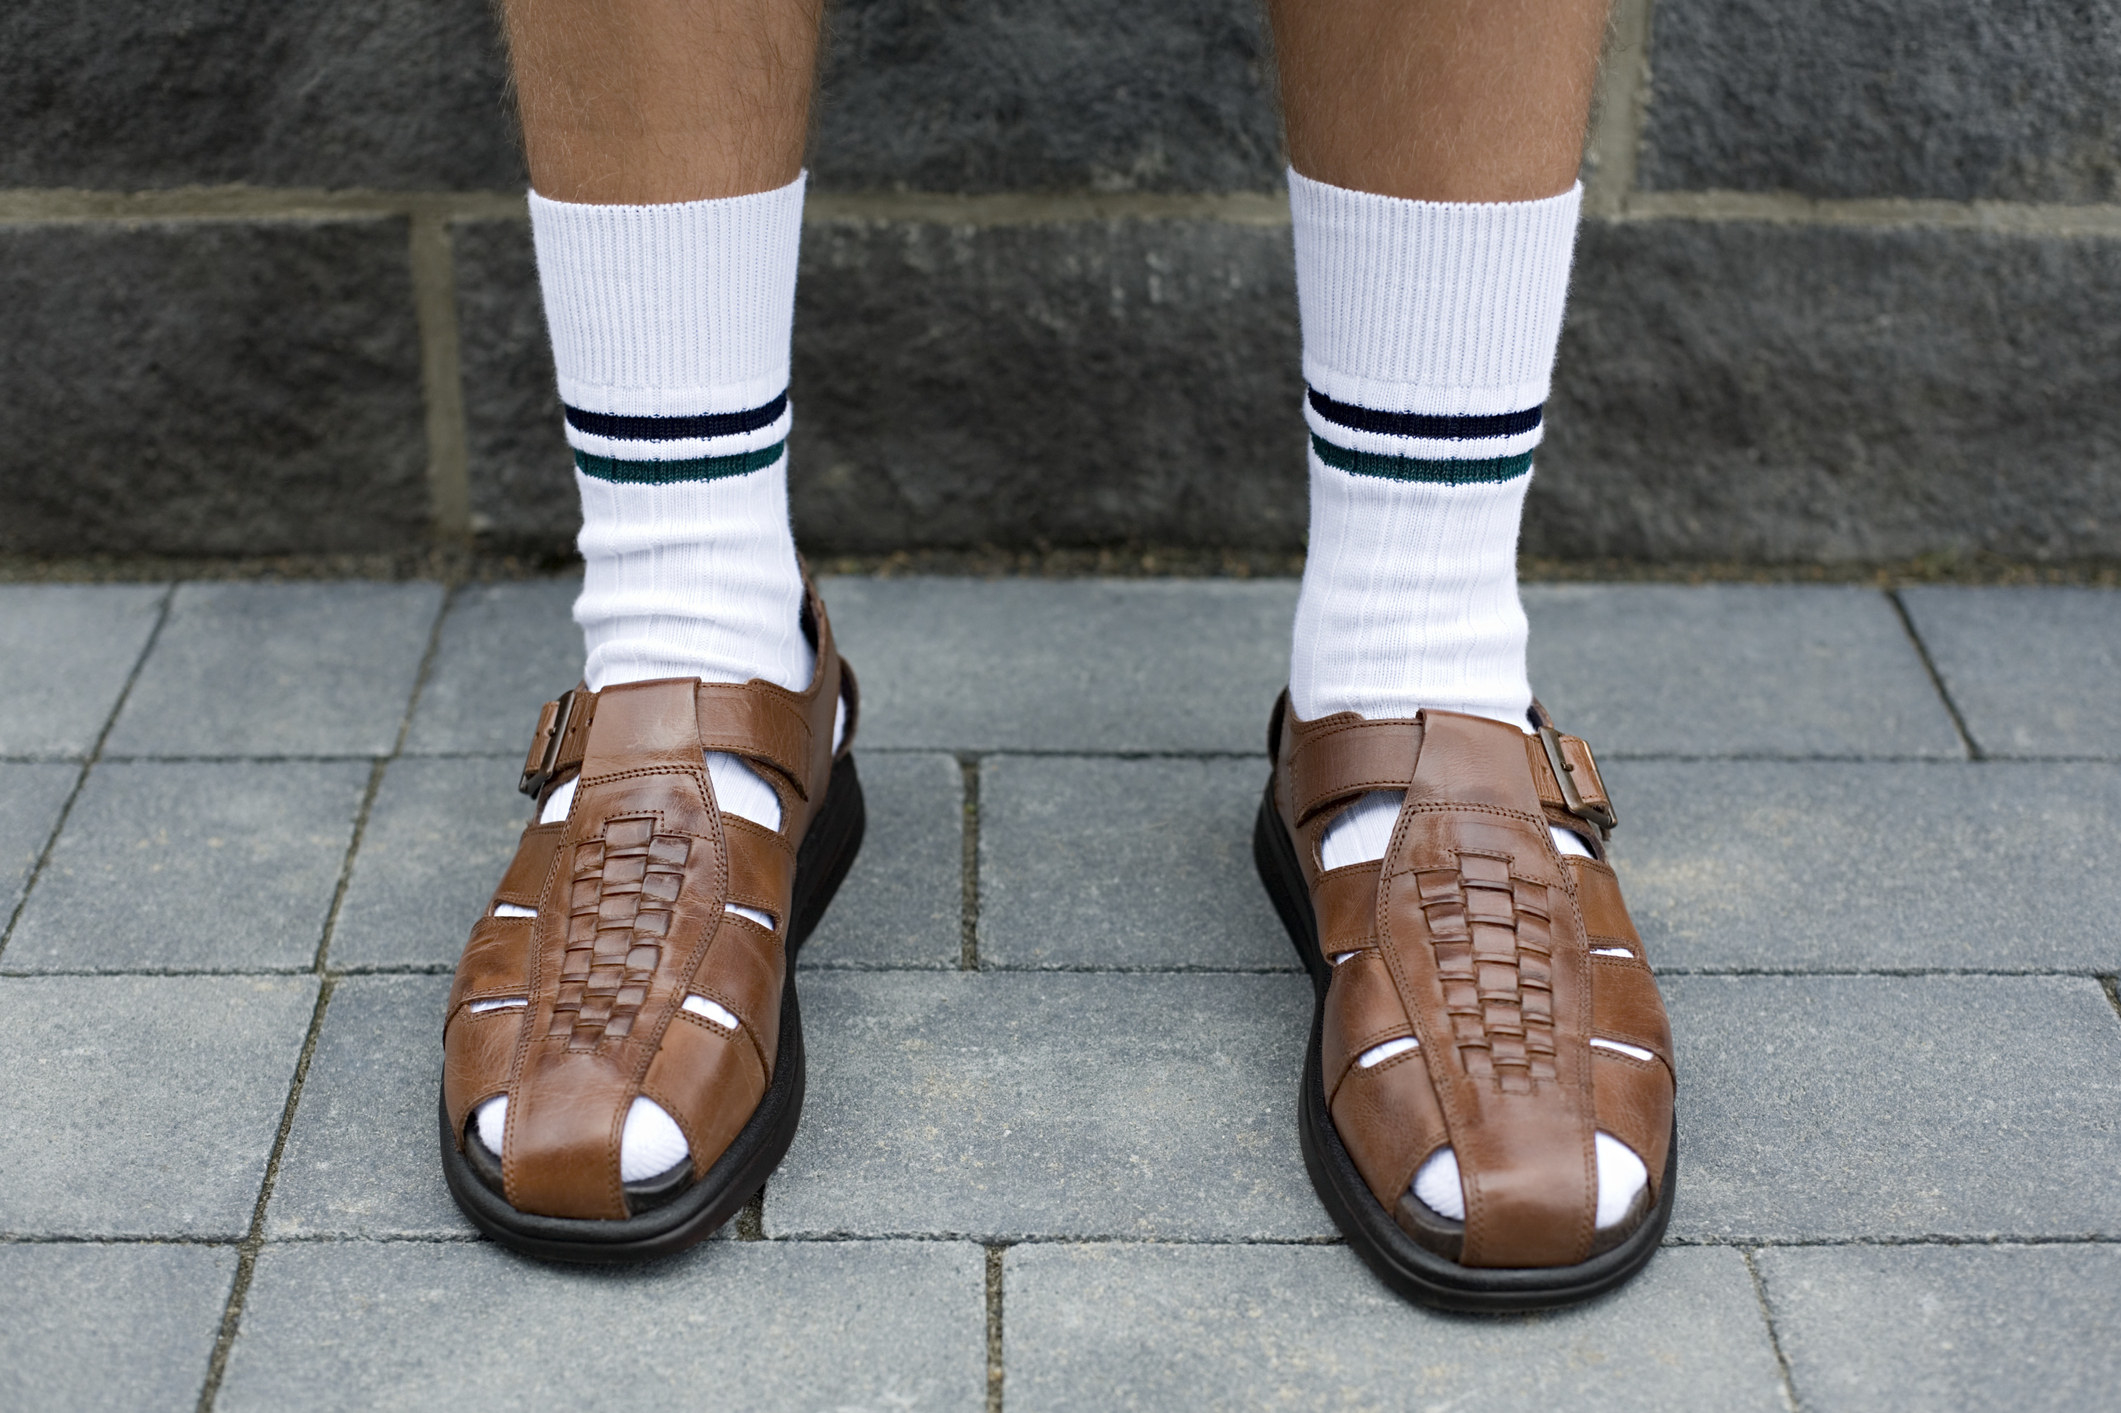 A man&#x27;s legs from mid-calf down, wearing high white socks with two stripes and brown leather sandals